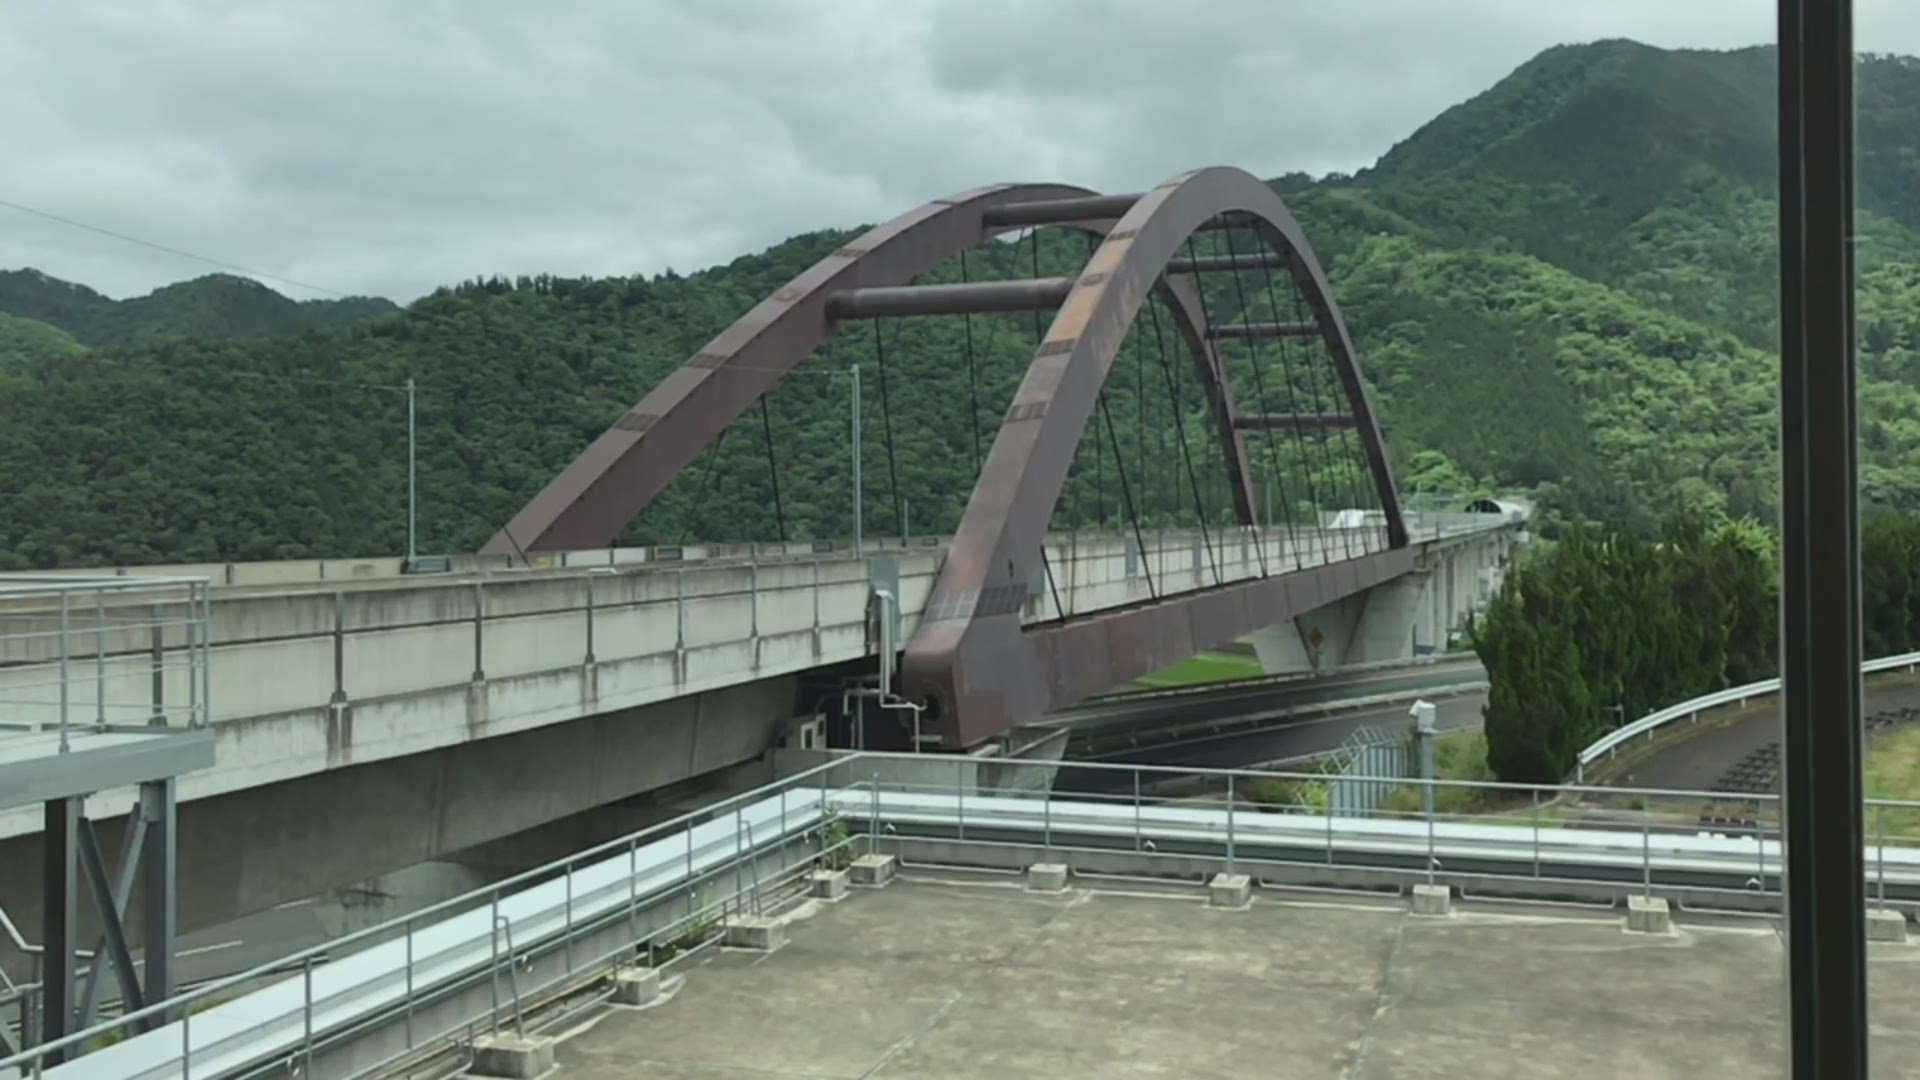 SCmaglev recorded in Yamanashi, Japan. A similar train proposed for the U.S. could link D.C. and Baltimore in 15 minutes.